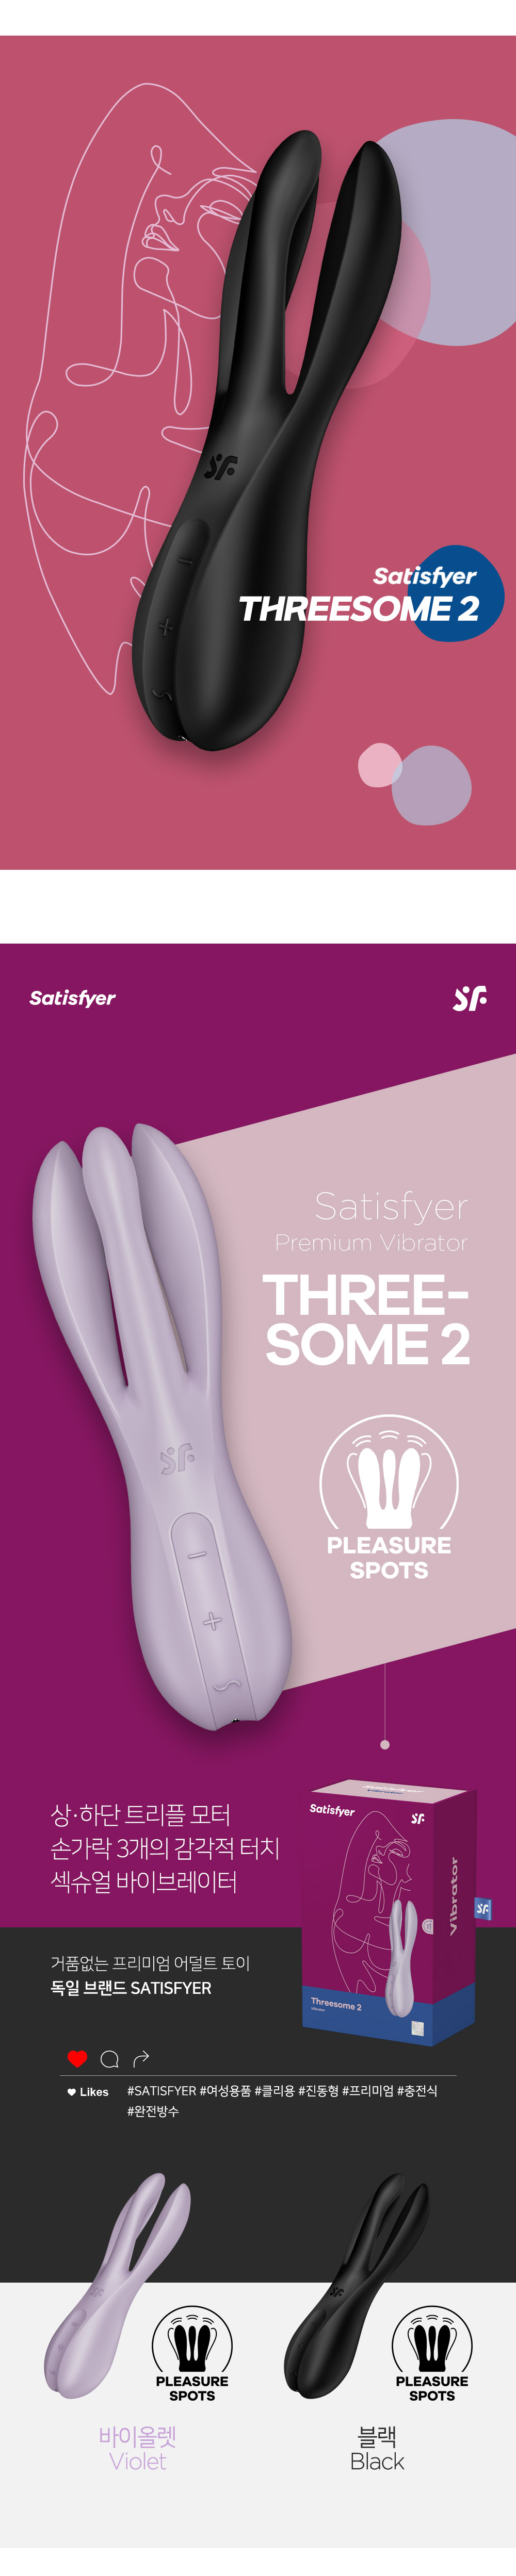 SATISFYER THREESOME 2 (2 COLOR)